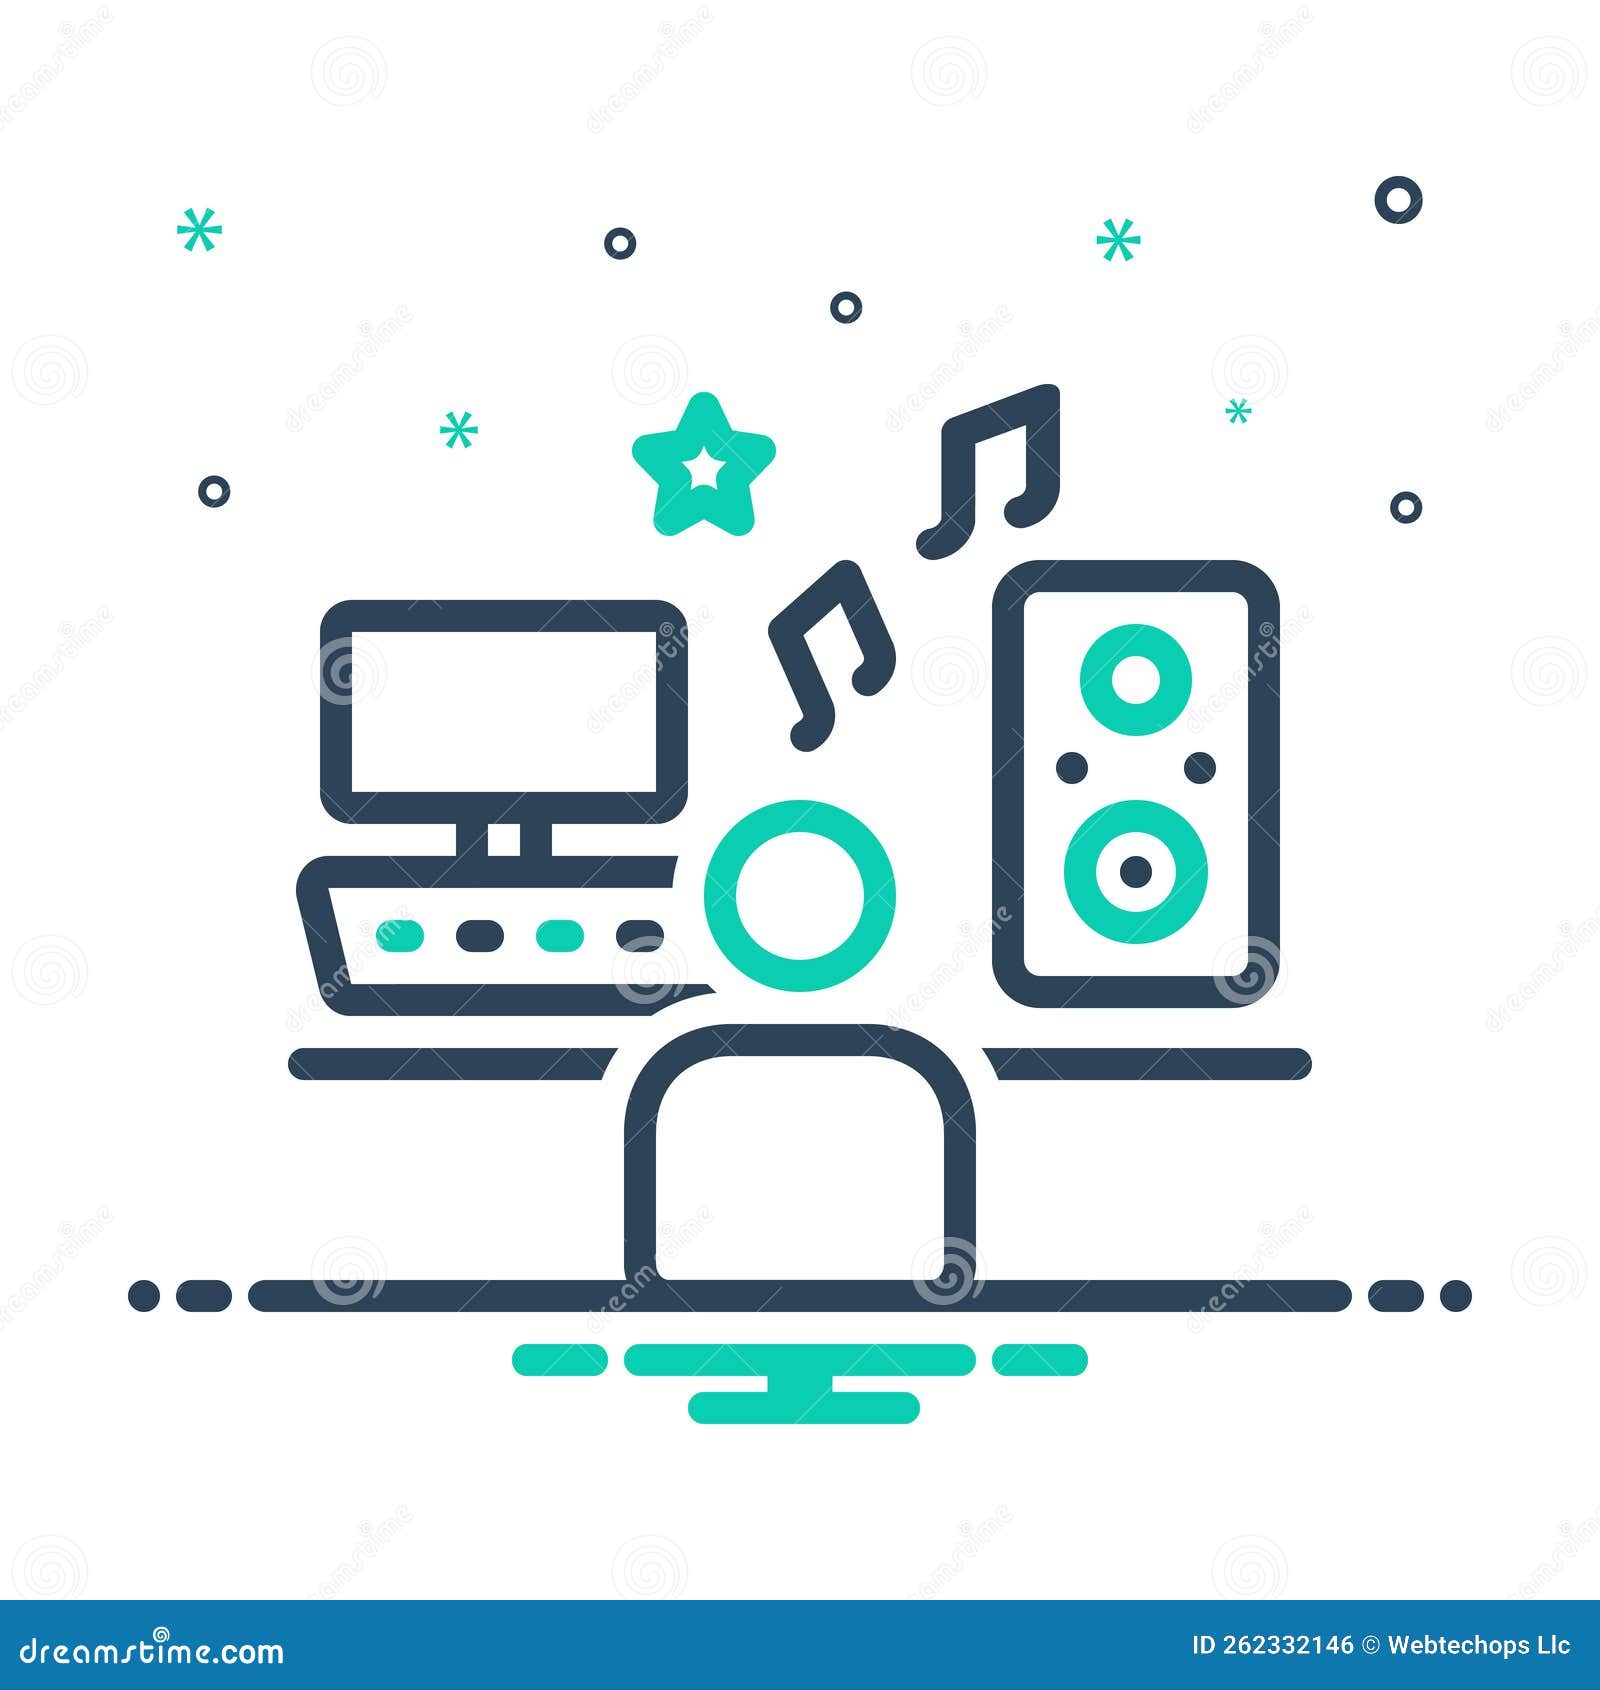 mix icon for composer, musician and melodist